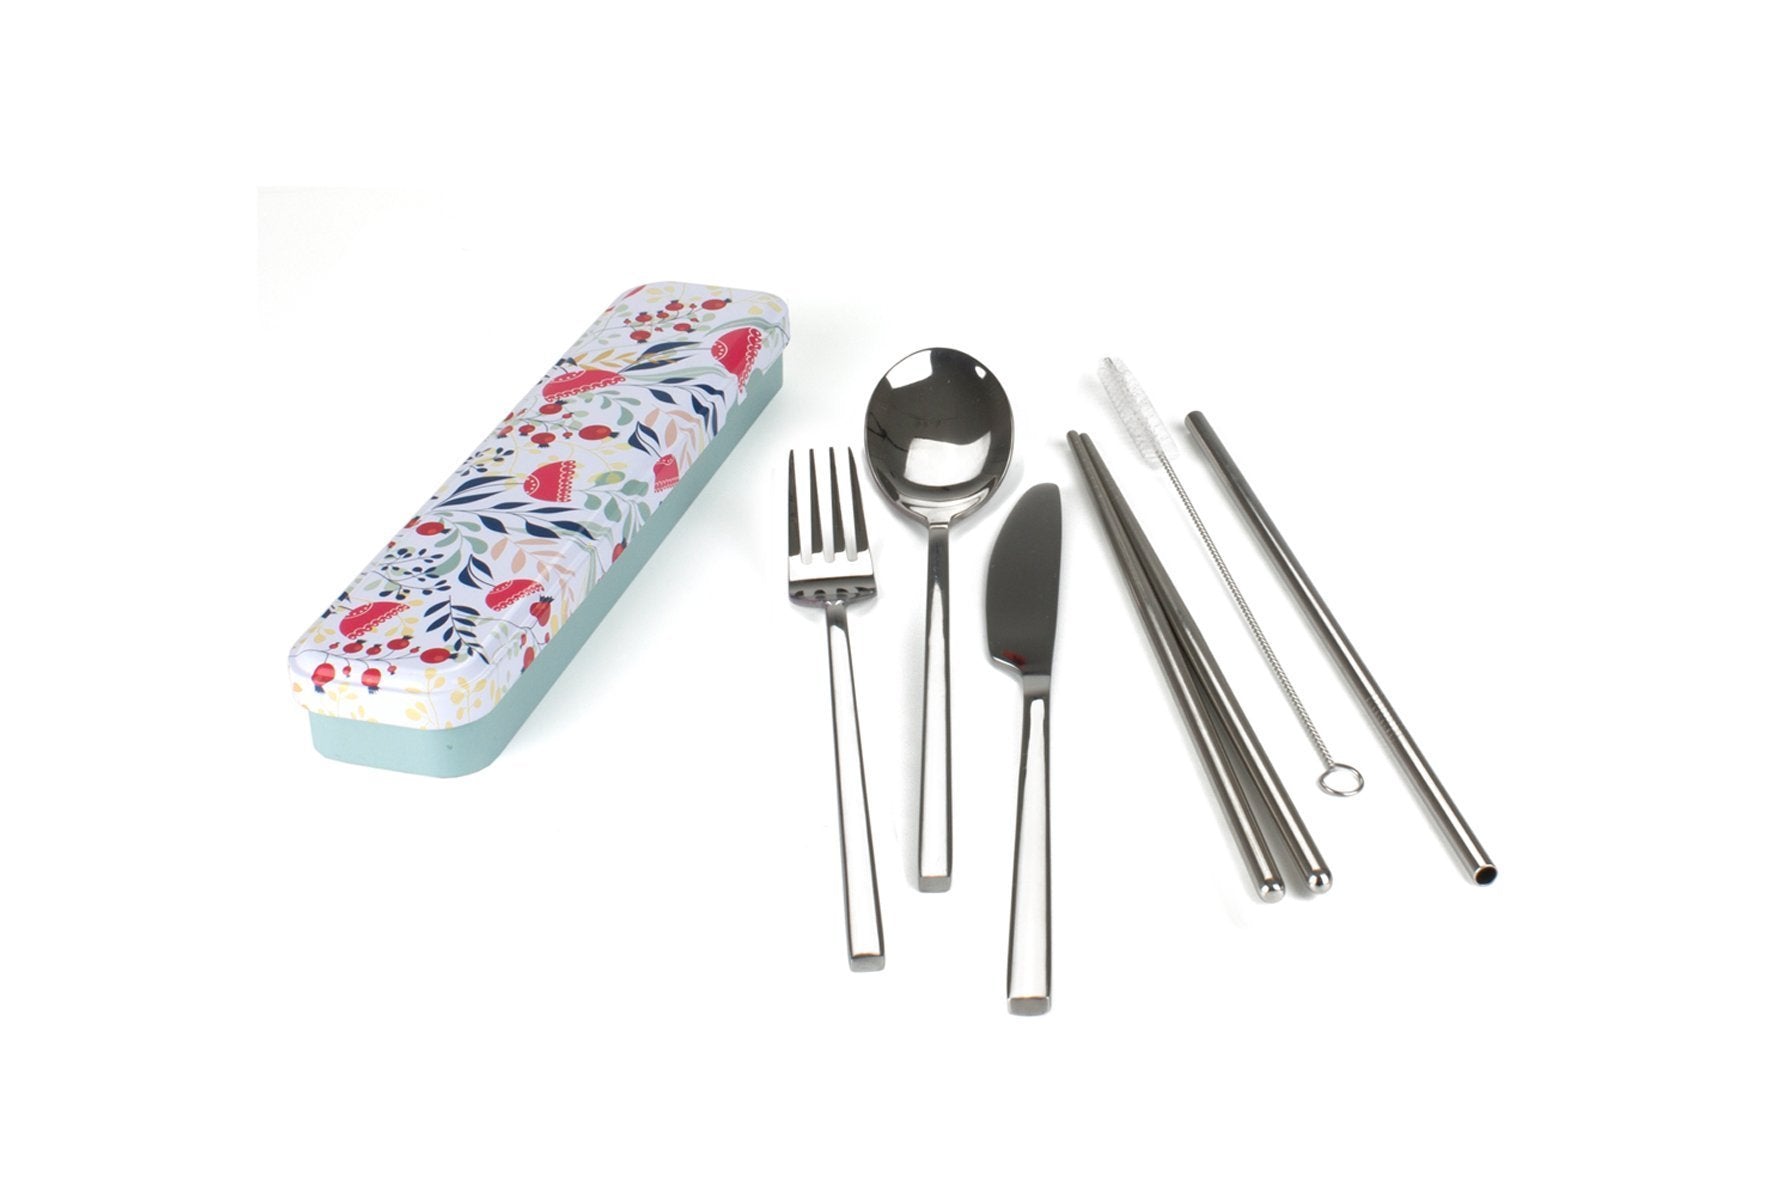 retro kitchen carry your cutlery - stainless steel cutlery set botanical